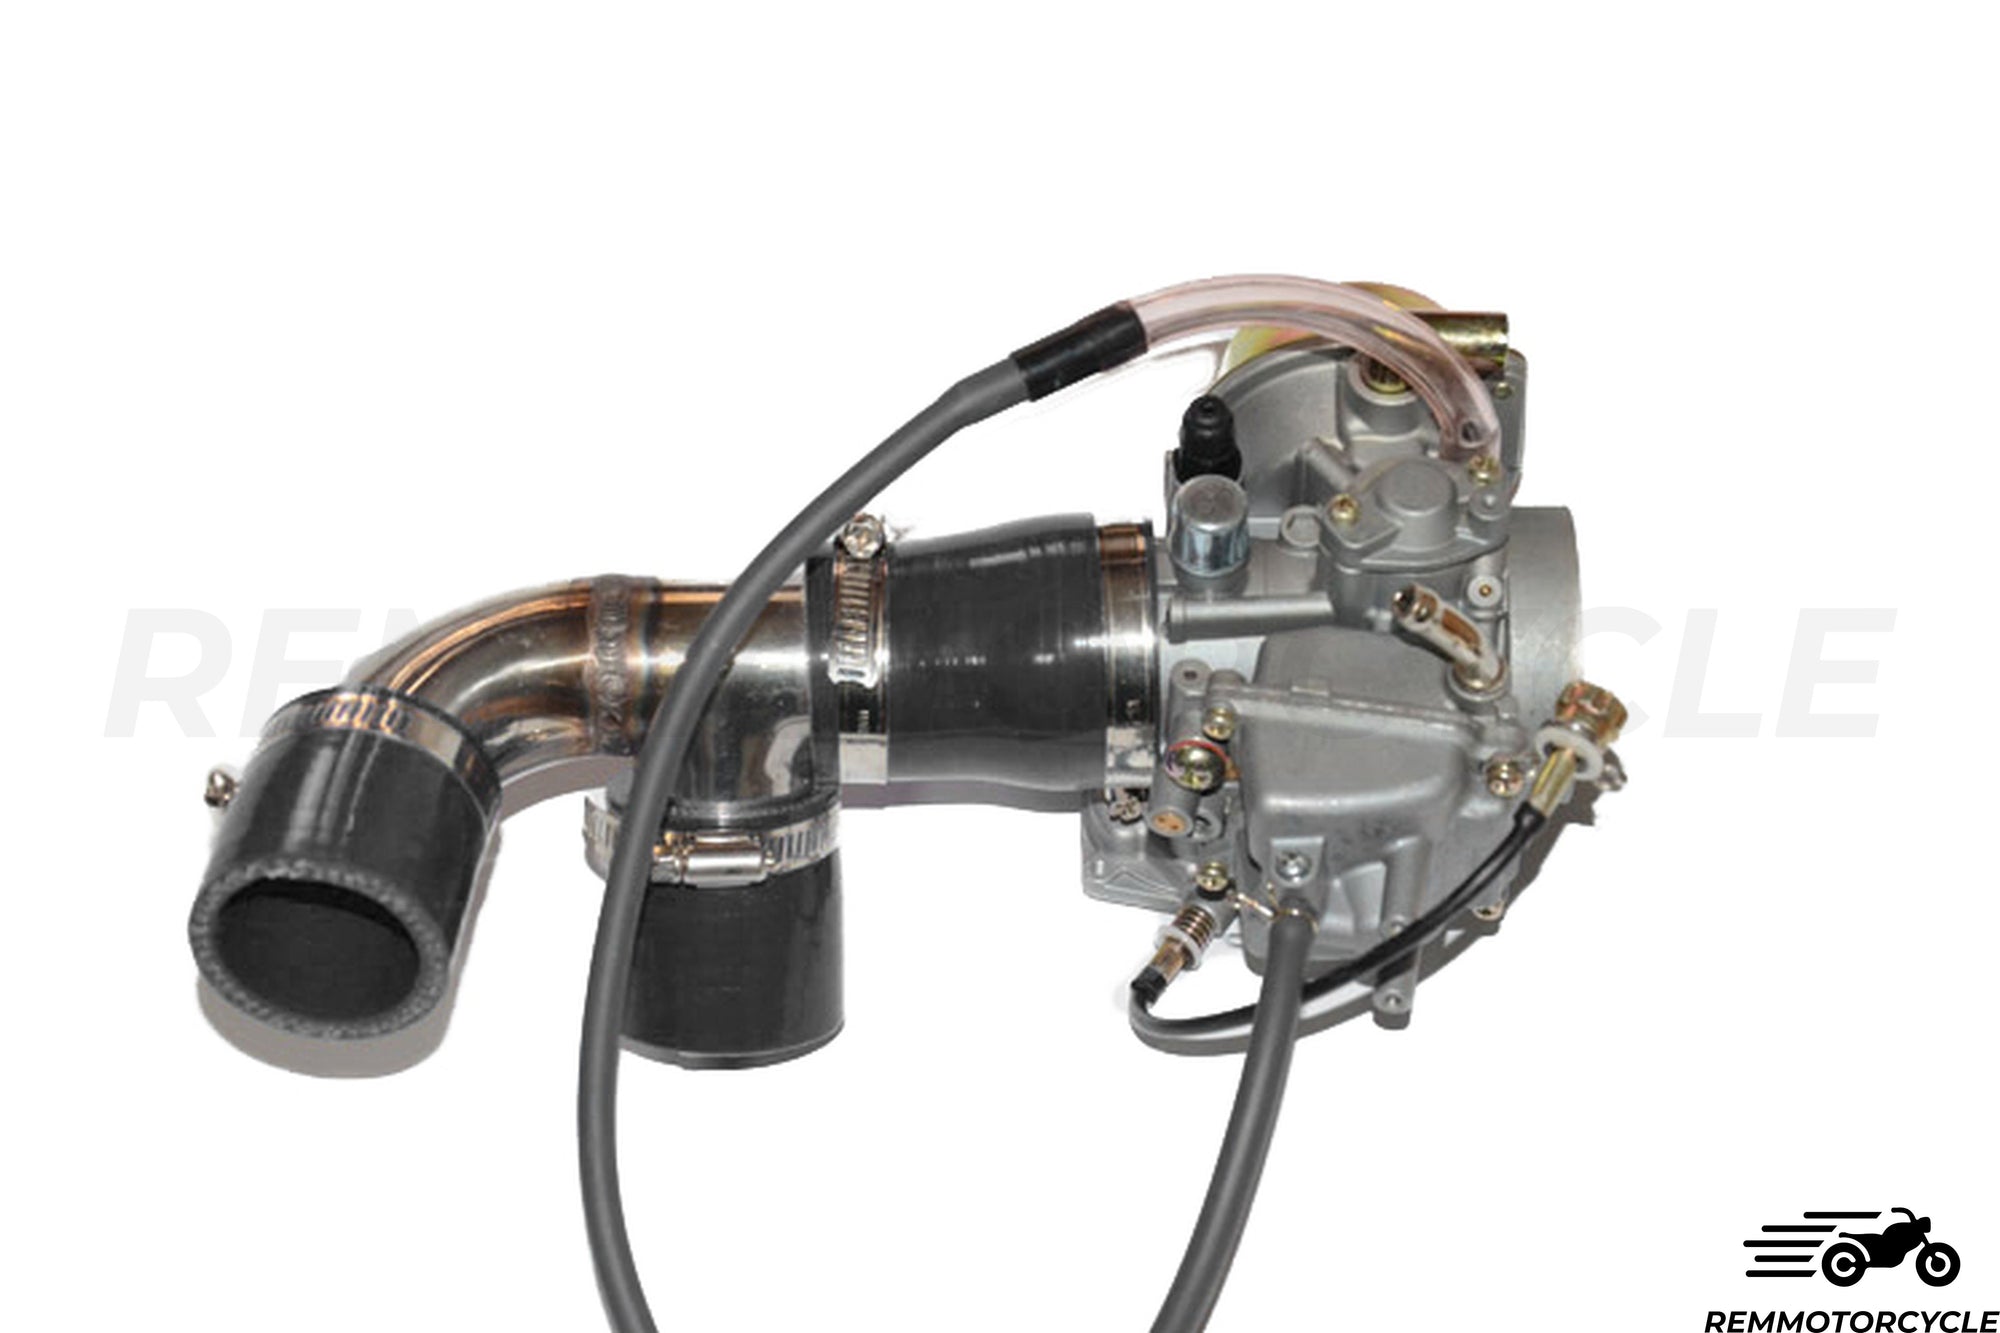 Pipe and Carb 2 in 1 HONDA SHADOW 600:lle